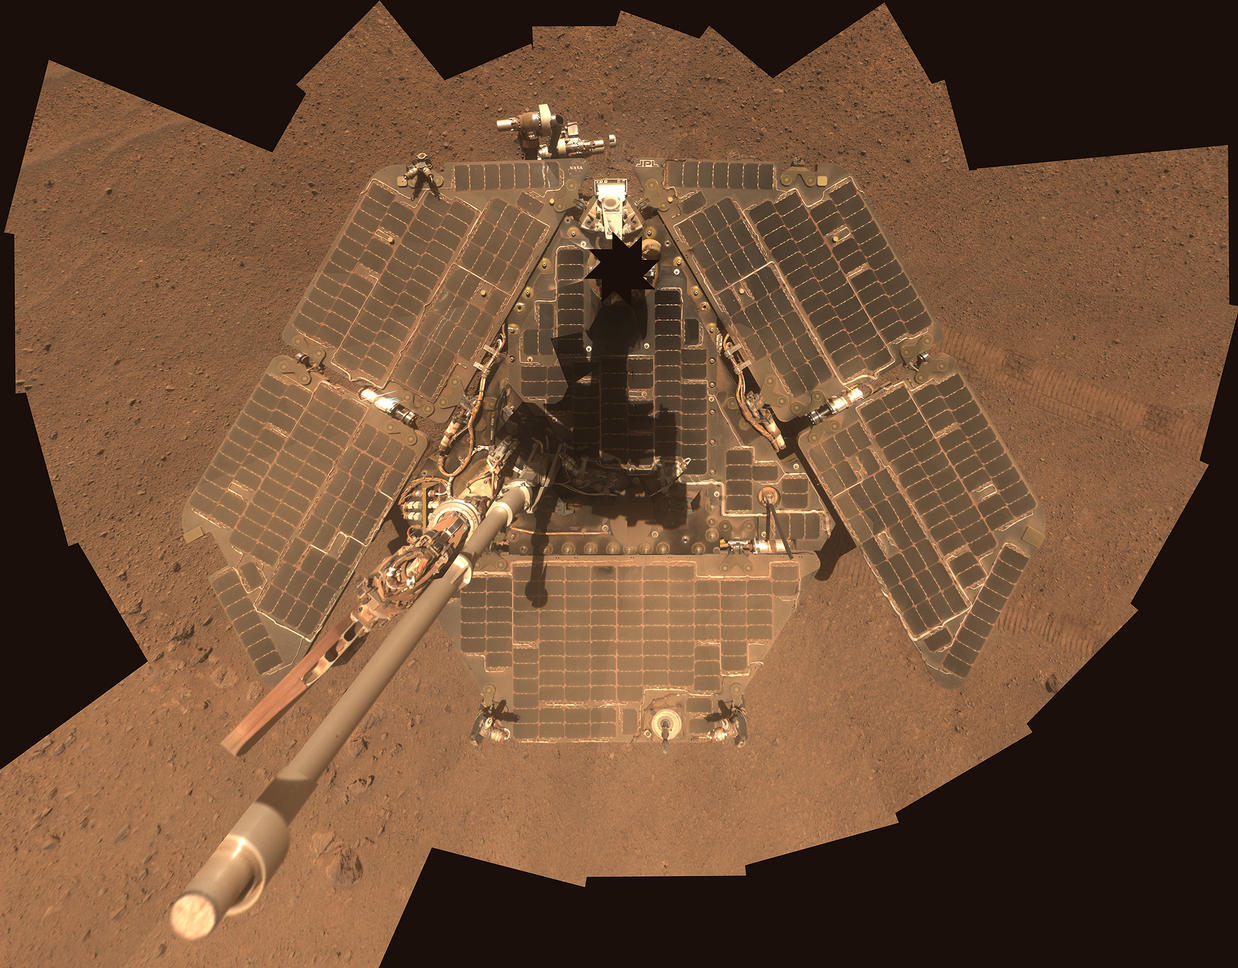 solar panels on rover seen from above